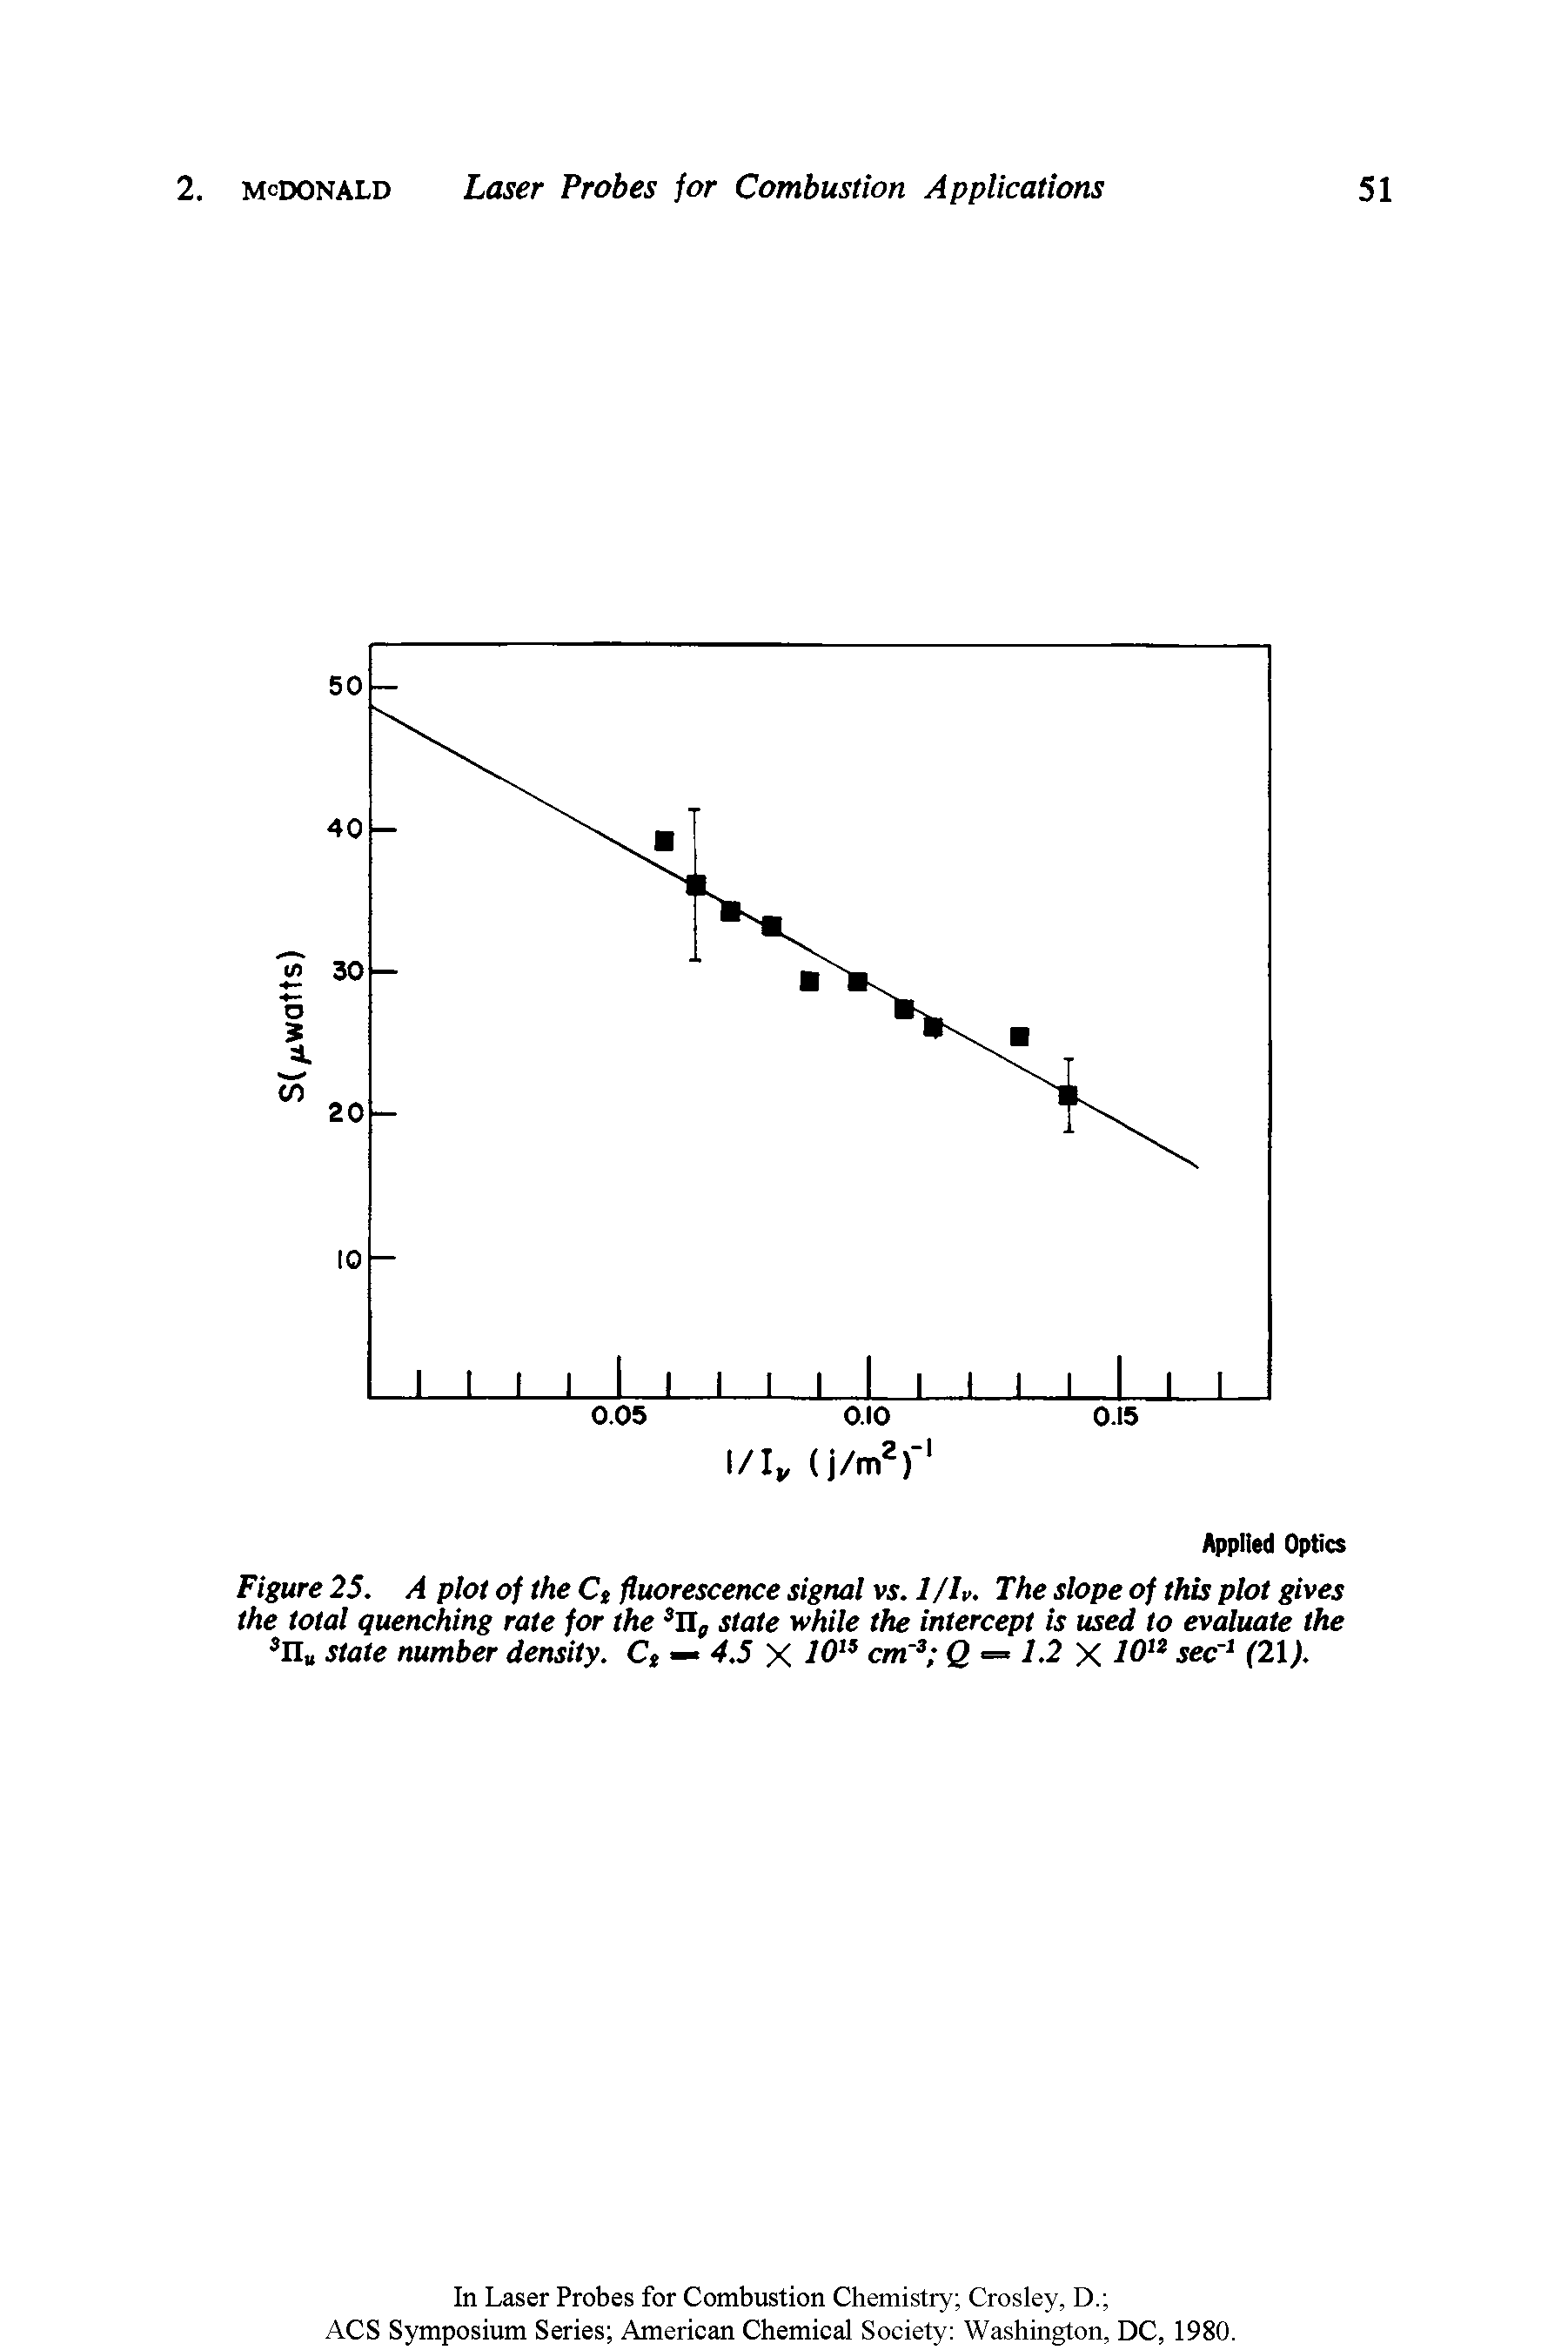 Figure 25. A plot of the Ct fluorescence signal vs. 1/Ip. The slope of this plot gives the total quenching rate for the n, state while the intercept is used to evaluate the 3n state number density. C, — 4.5 X 1013 cm 3 Q = 1.2 X l 12 sec 1 (21).